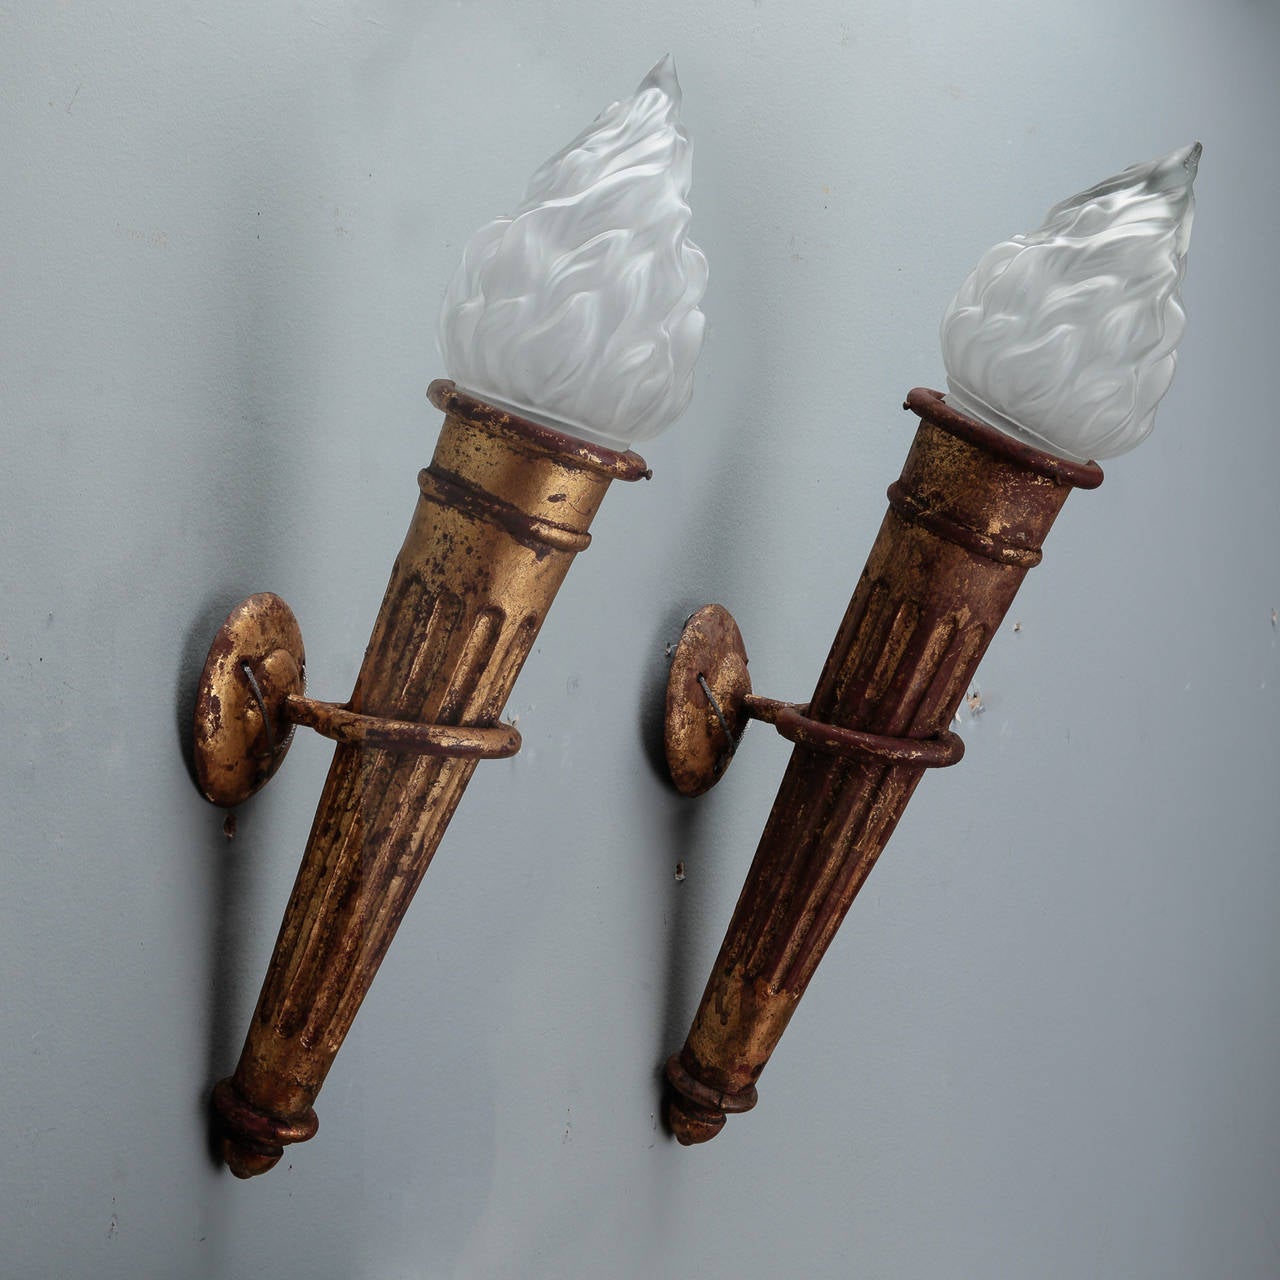 Circa 1900 pair of Spanish large gilt metal neoclassical style torch form wall lights / sconces. Topped with satin glass flame-shaped globes. Sold and priced as a pair. New wiring for US electrical standards.